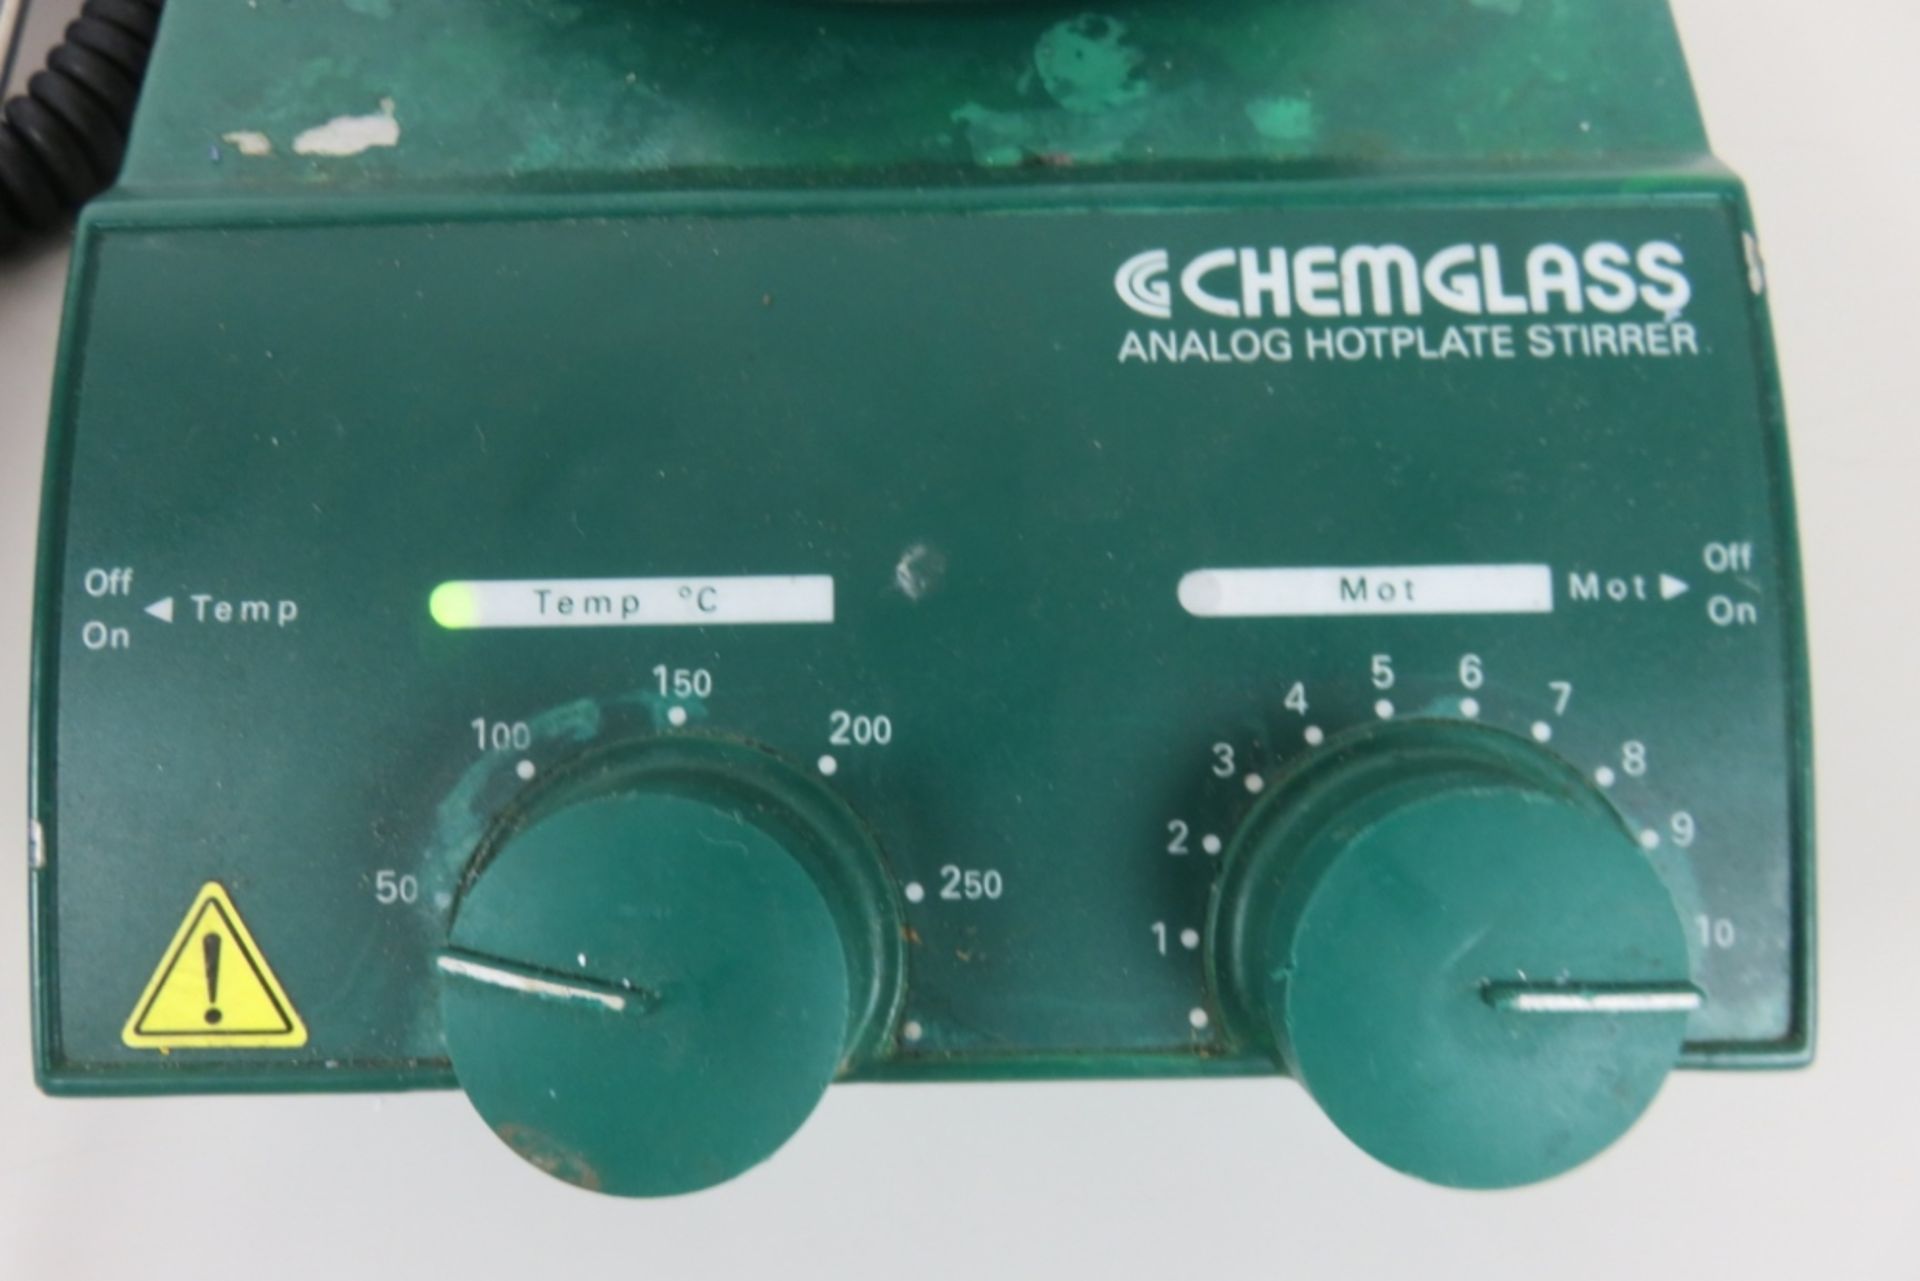 IKA RET Basic and Chemglass Hot Plate Stirrers - Image 3 of 6